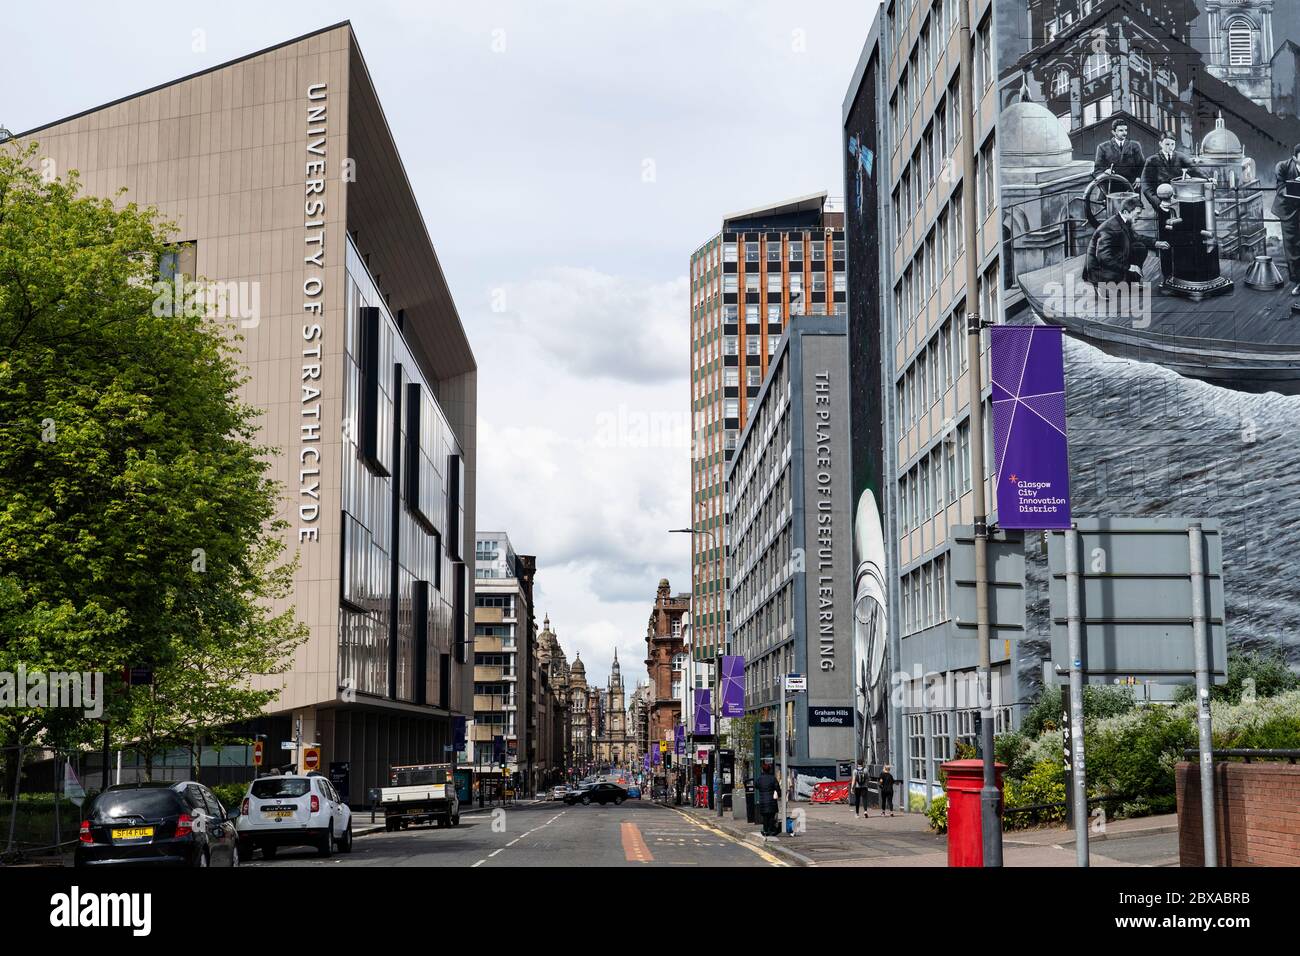 View of campus of University of Strathclyde on George Street in city centre of Glasgow, Scotland, UK Stock Photo